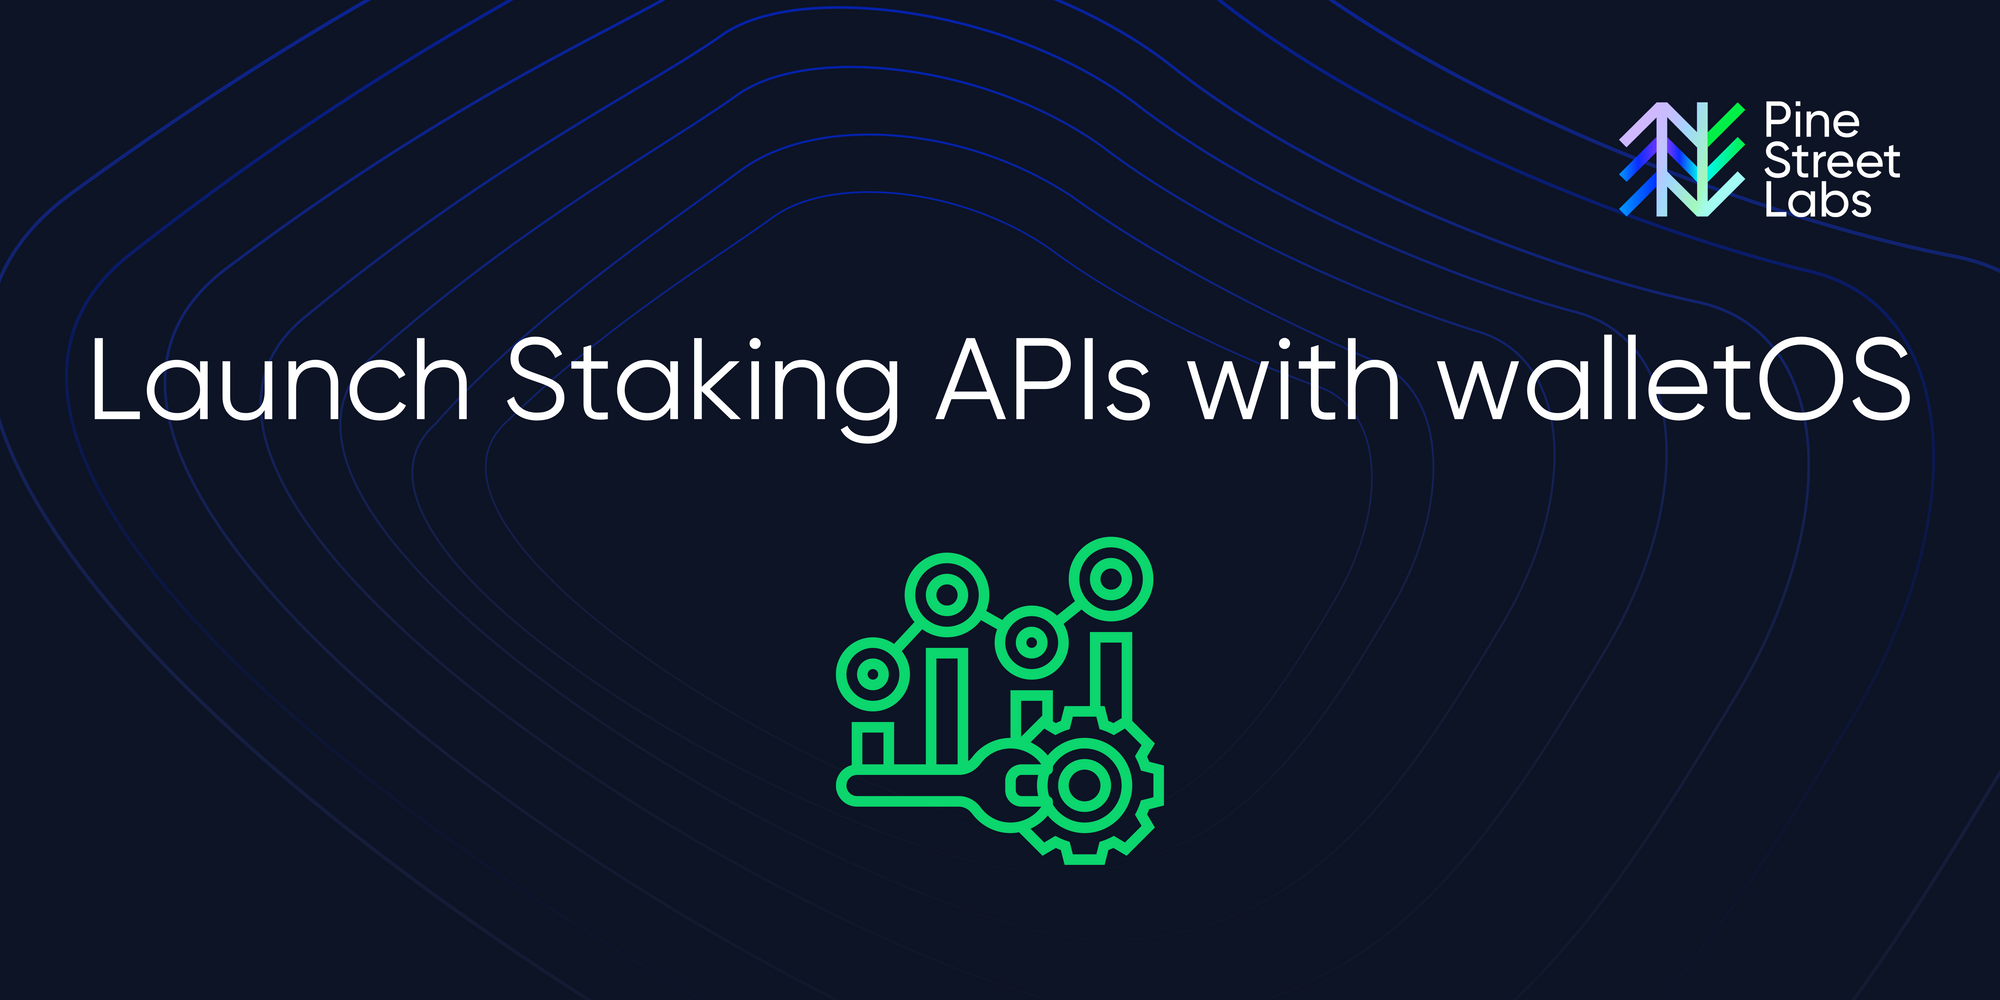 Launch Staking APIs with walletOS